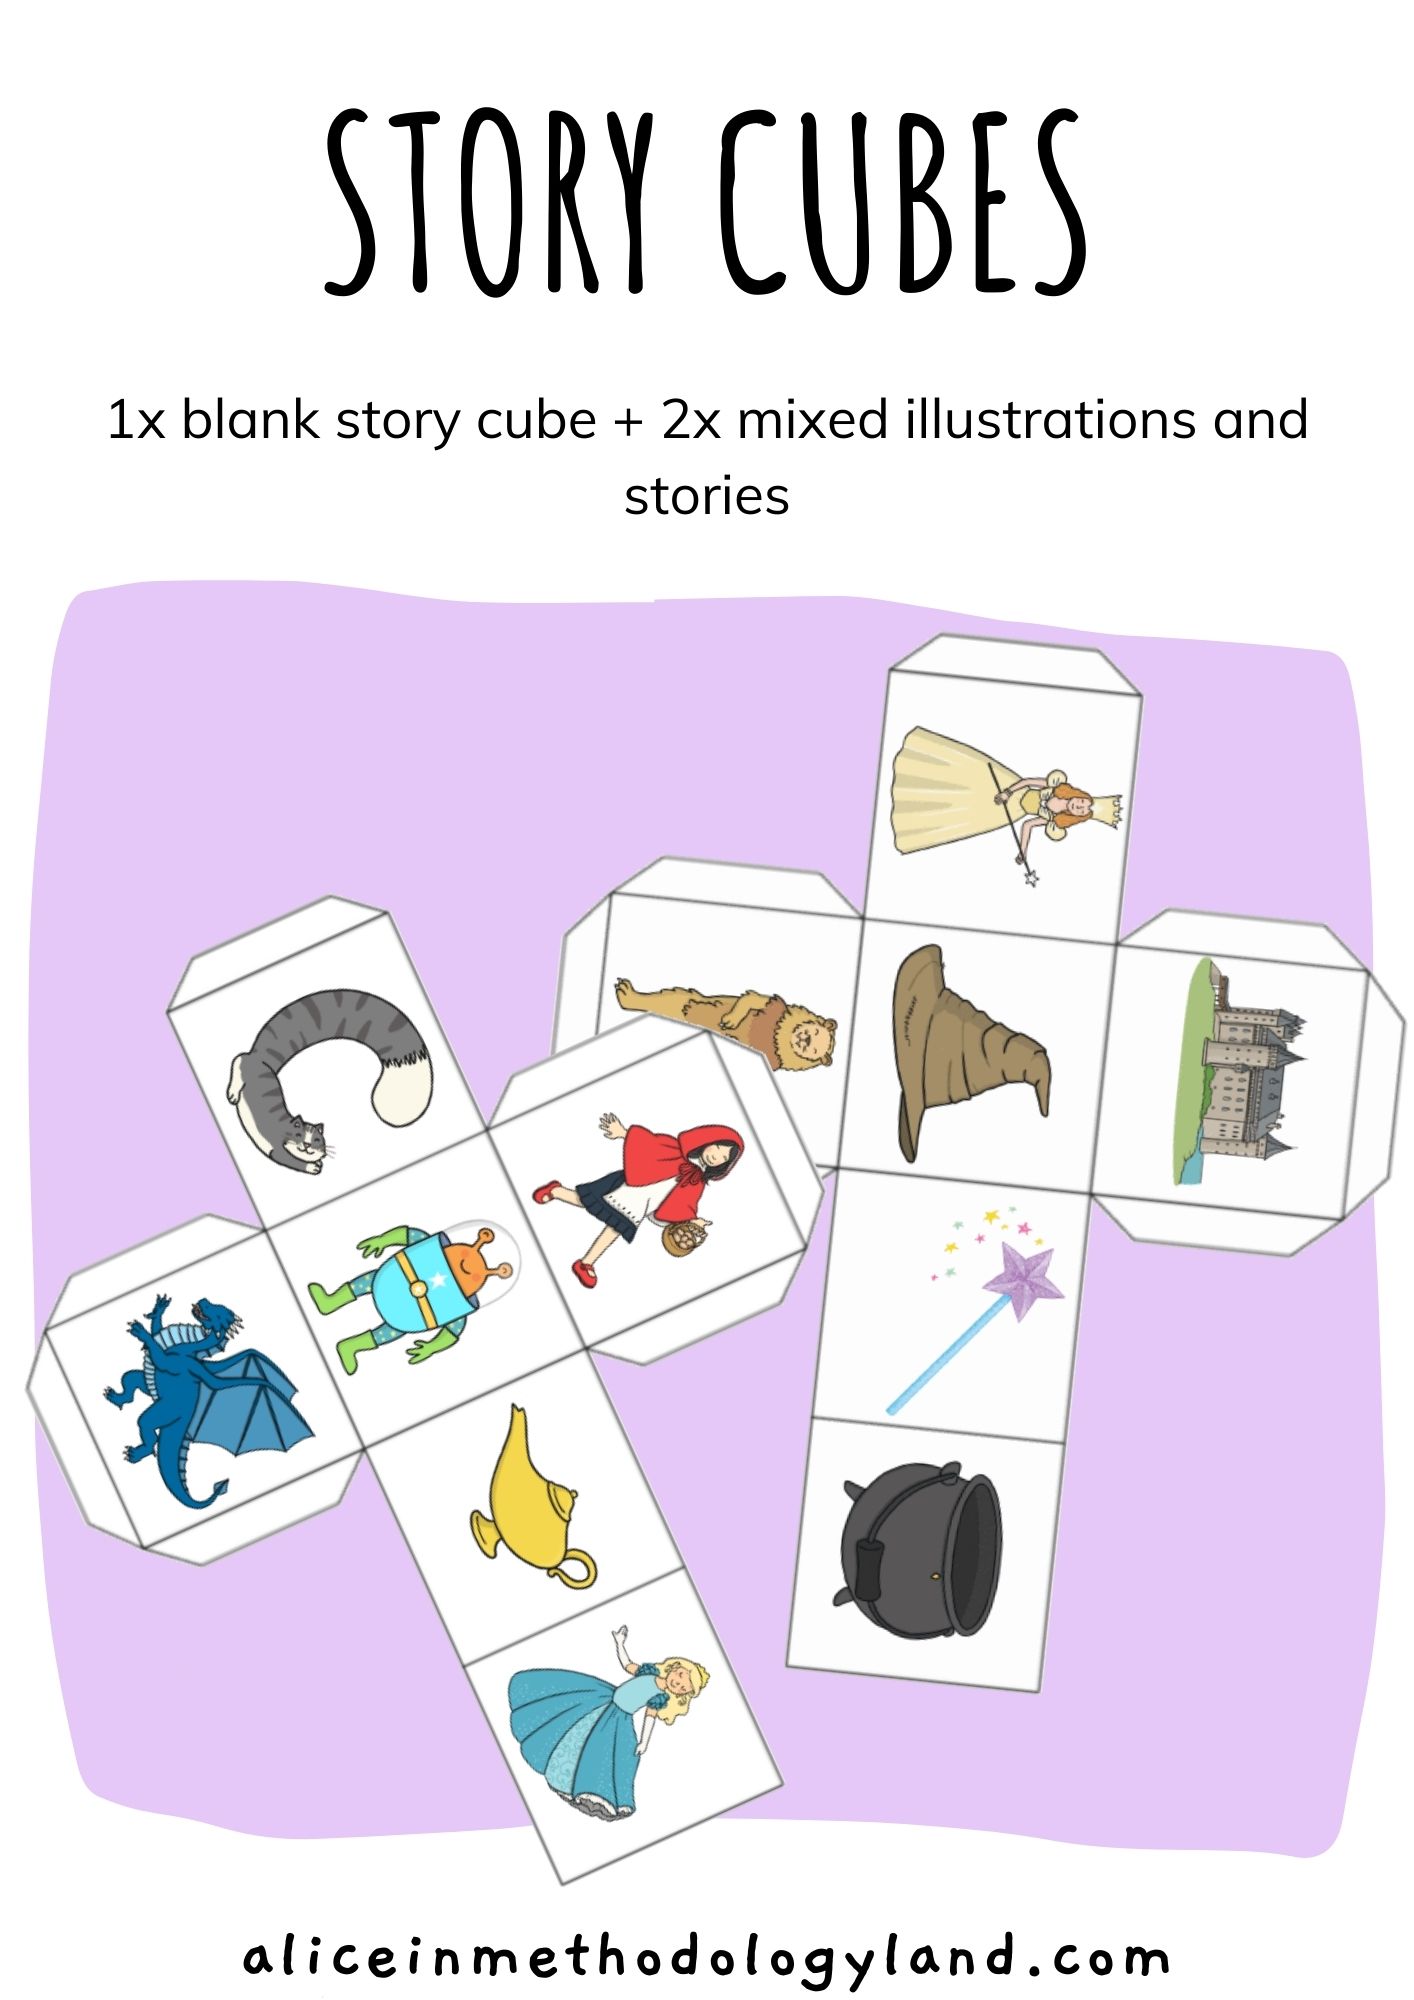 https://materials.aliceinmethodologyland.com/wp-content/uploads/2021/08/Story-cubes-famous-fairy-tales-aliceinmethodologyland.com-free-ESL-materials-2.jpg